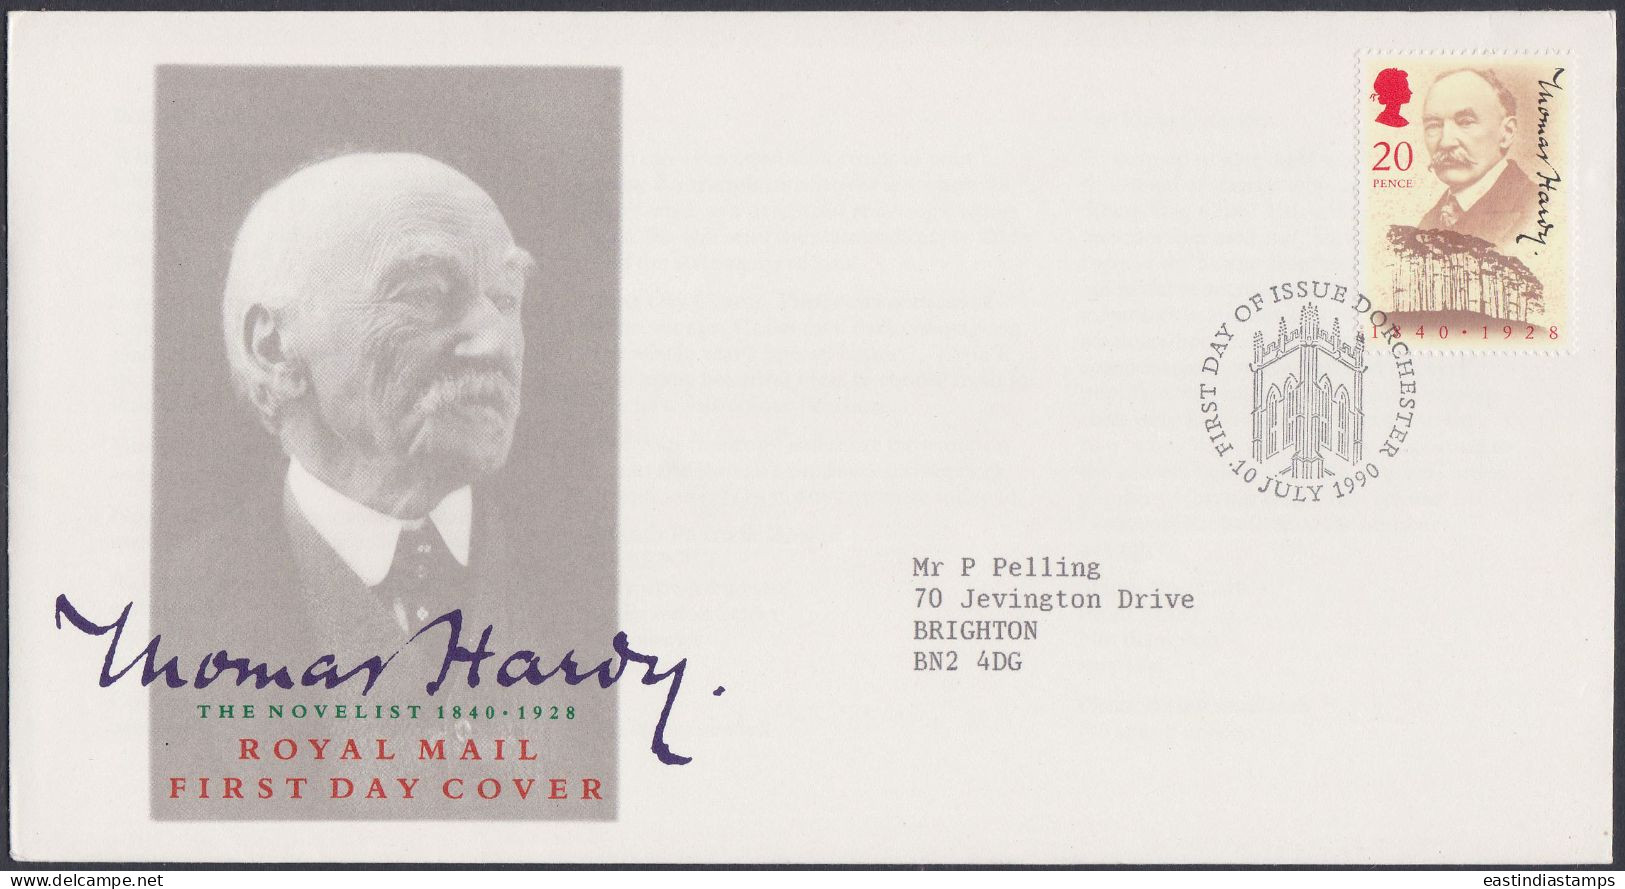 GB Great Britain 1990 FDC Thomas Hardy, Novelist, Novel, Literature, Art, Books, Pictorial Postmark, First Day Cover - Storia Postale